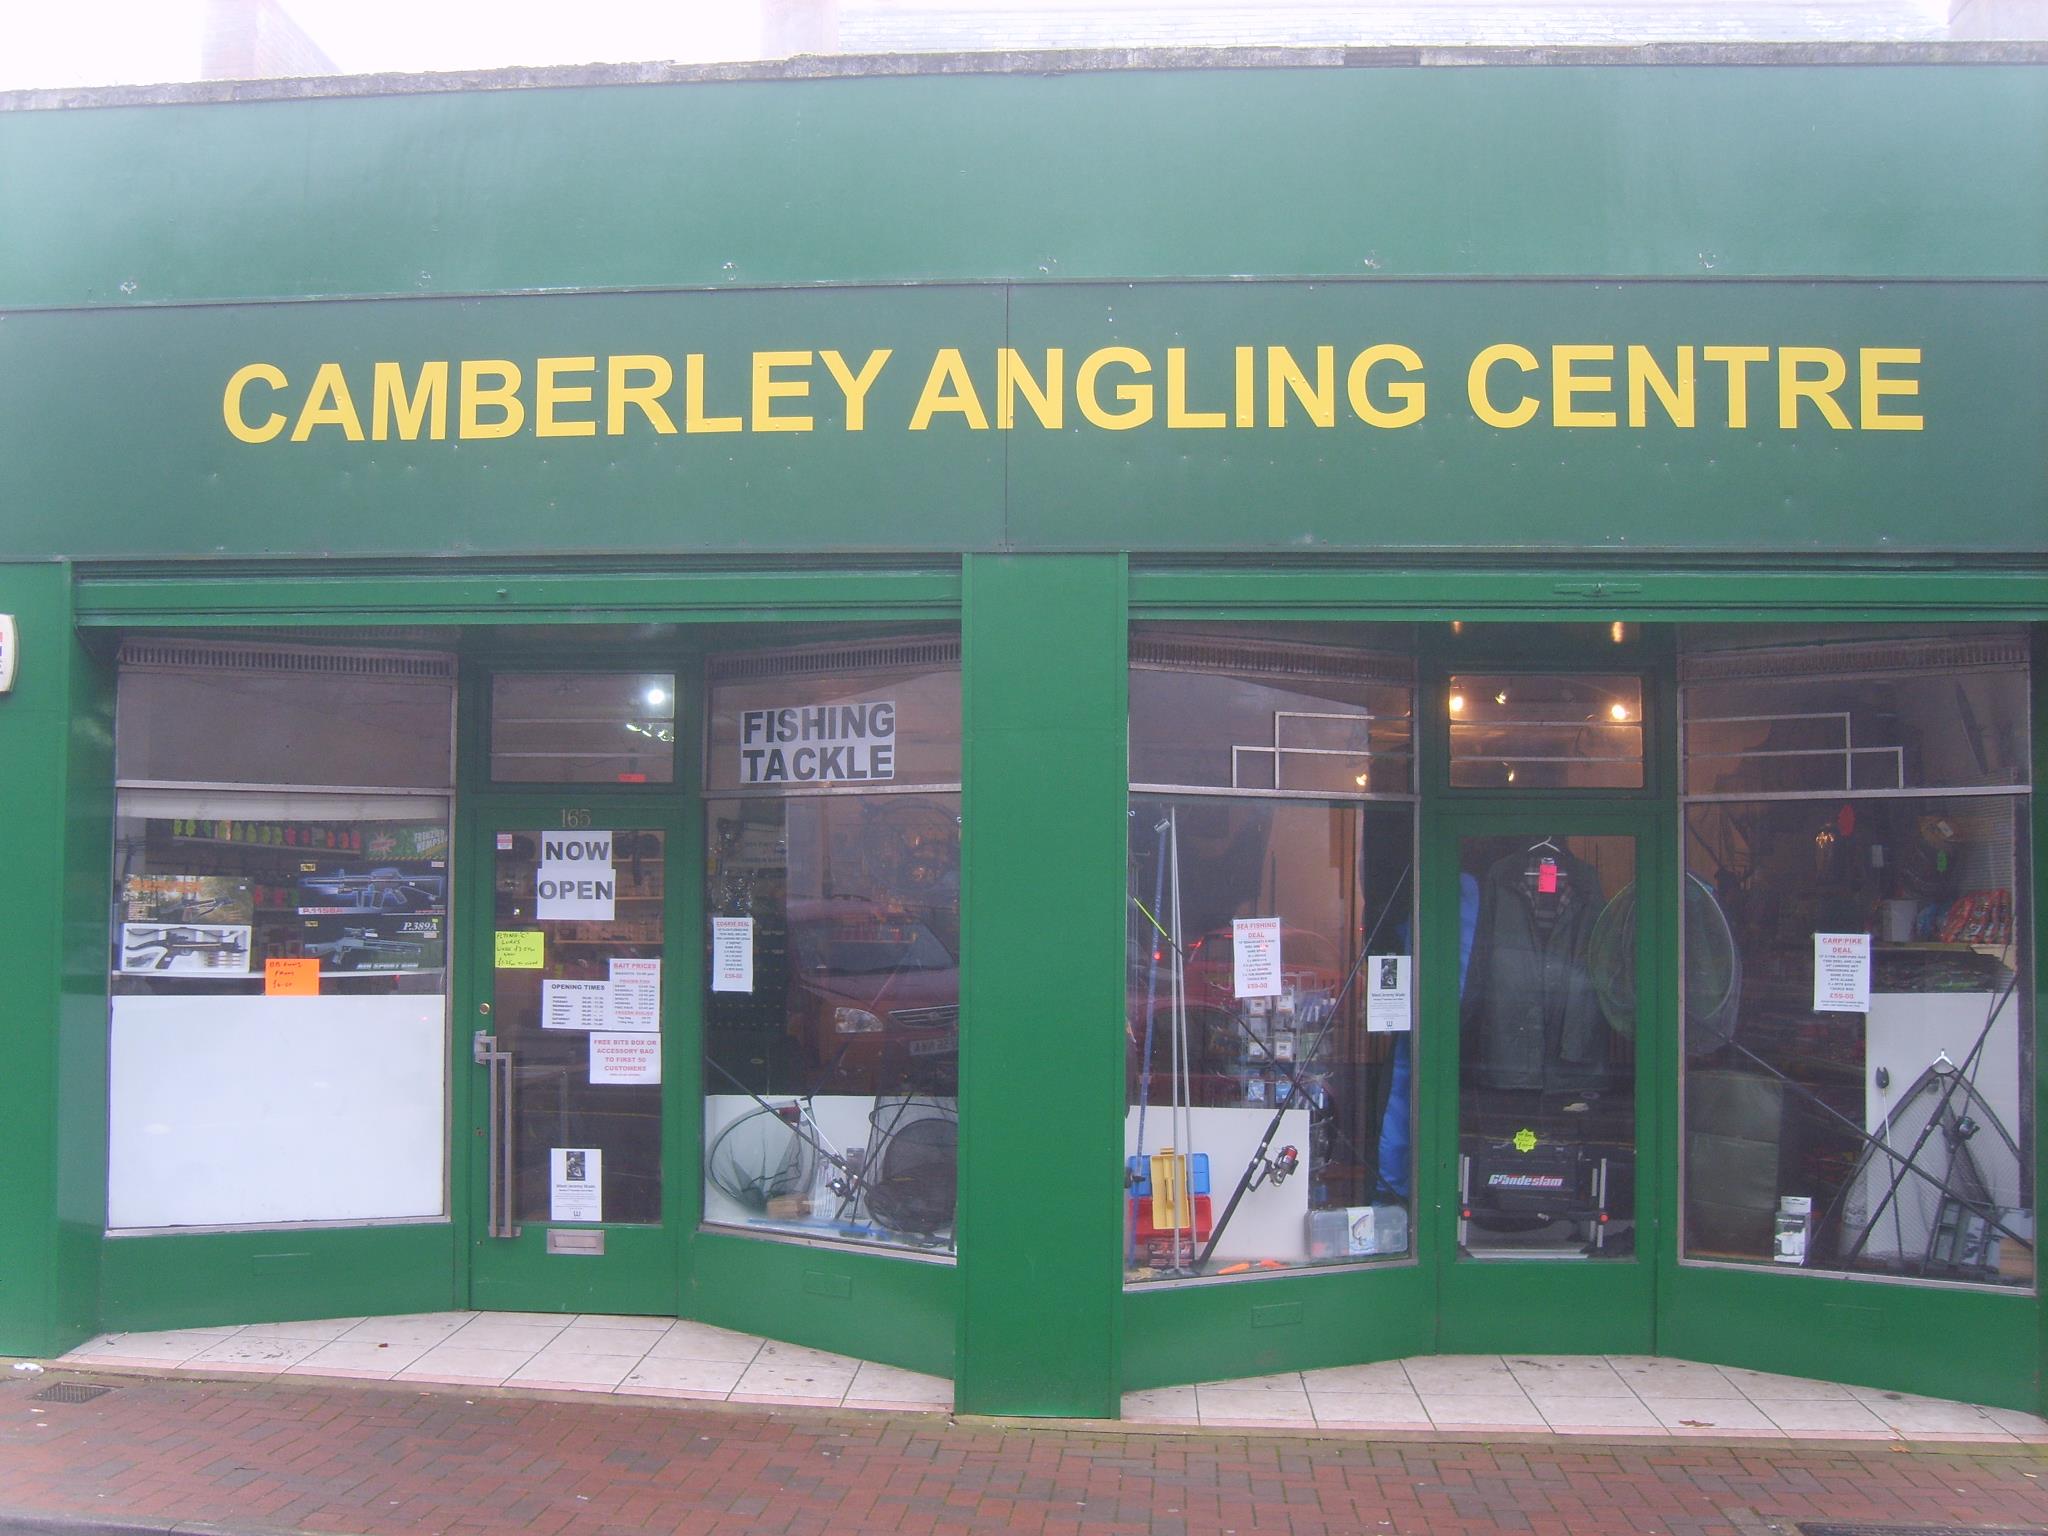 Camberley Angling Centre